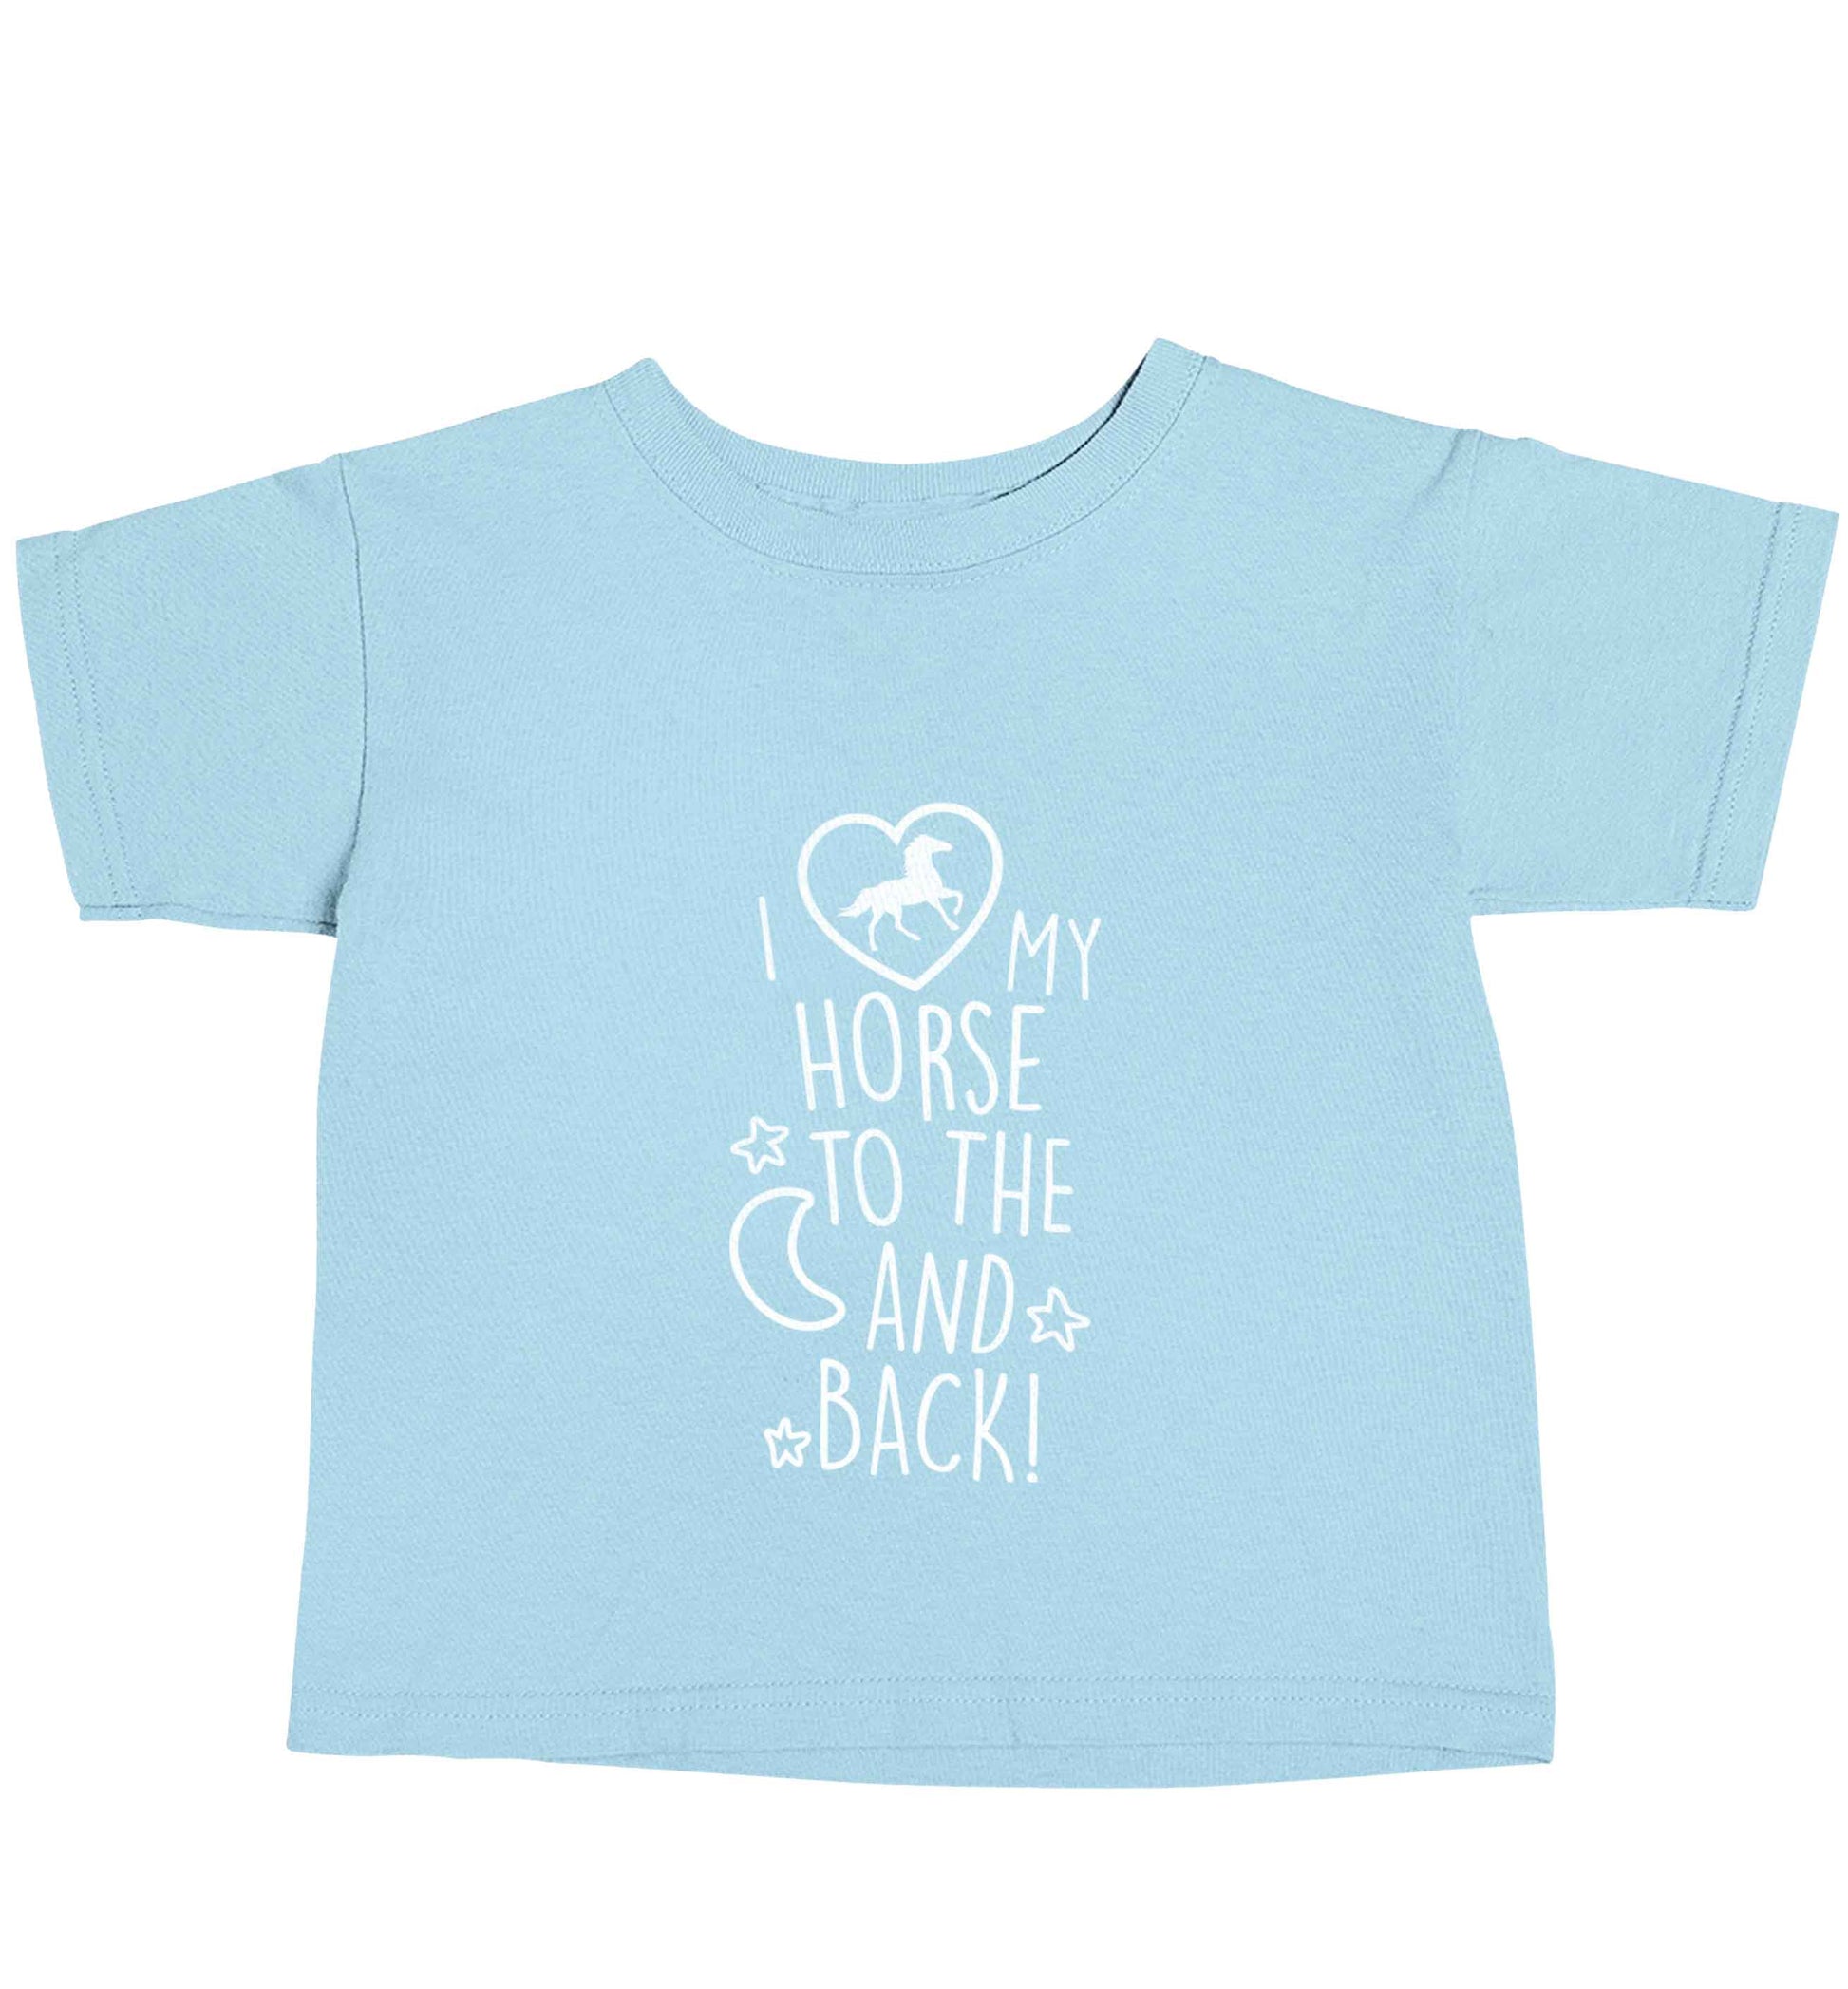 I love my horse to the moon and back light blue baby toddler Tshirt 2 Years